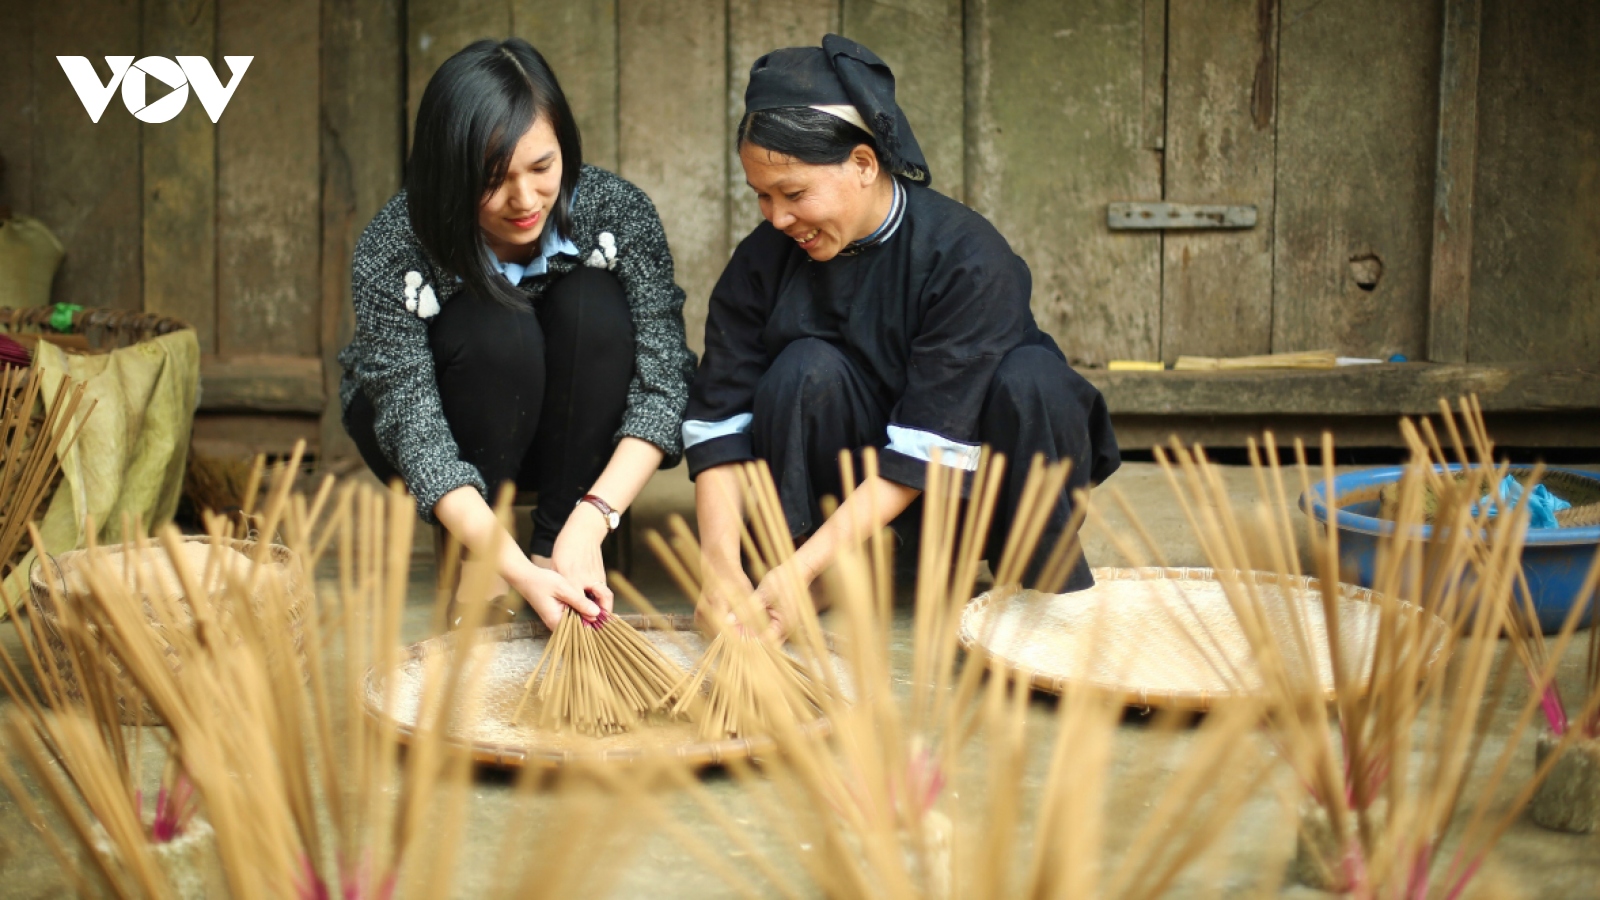 Incense-making craft of Nung ethnic group in Cao Bang